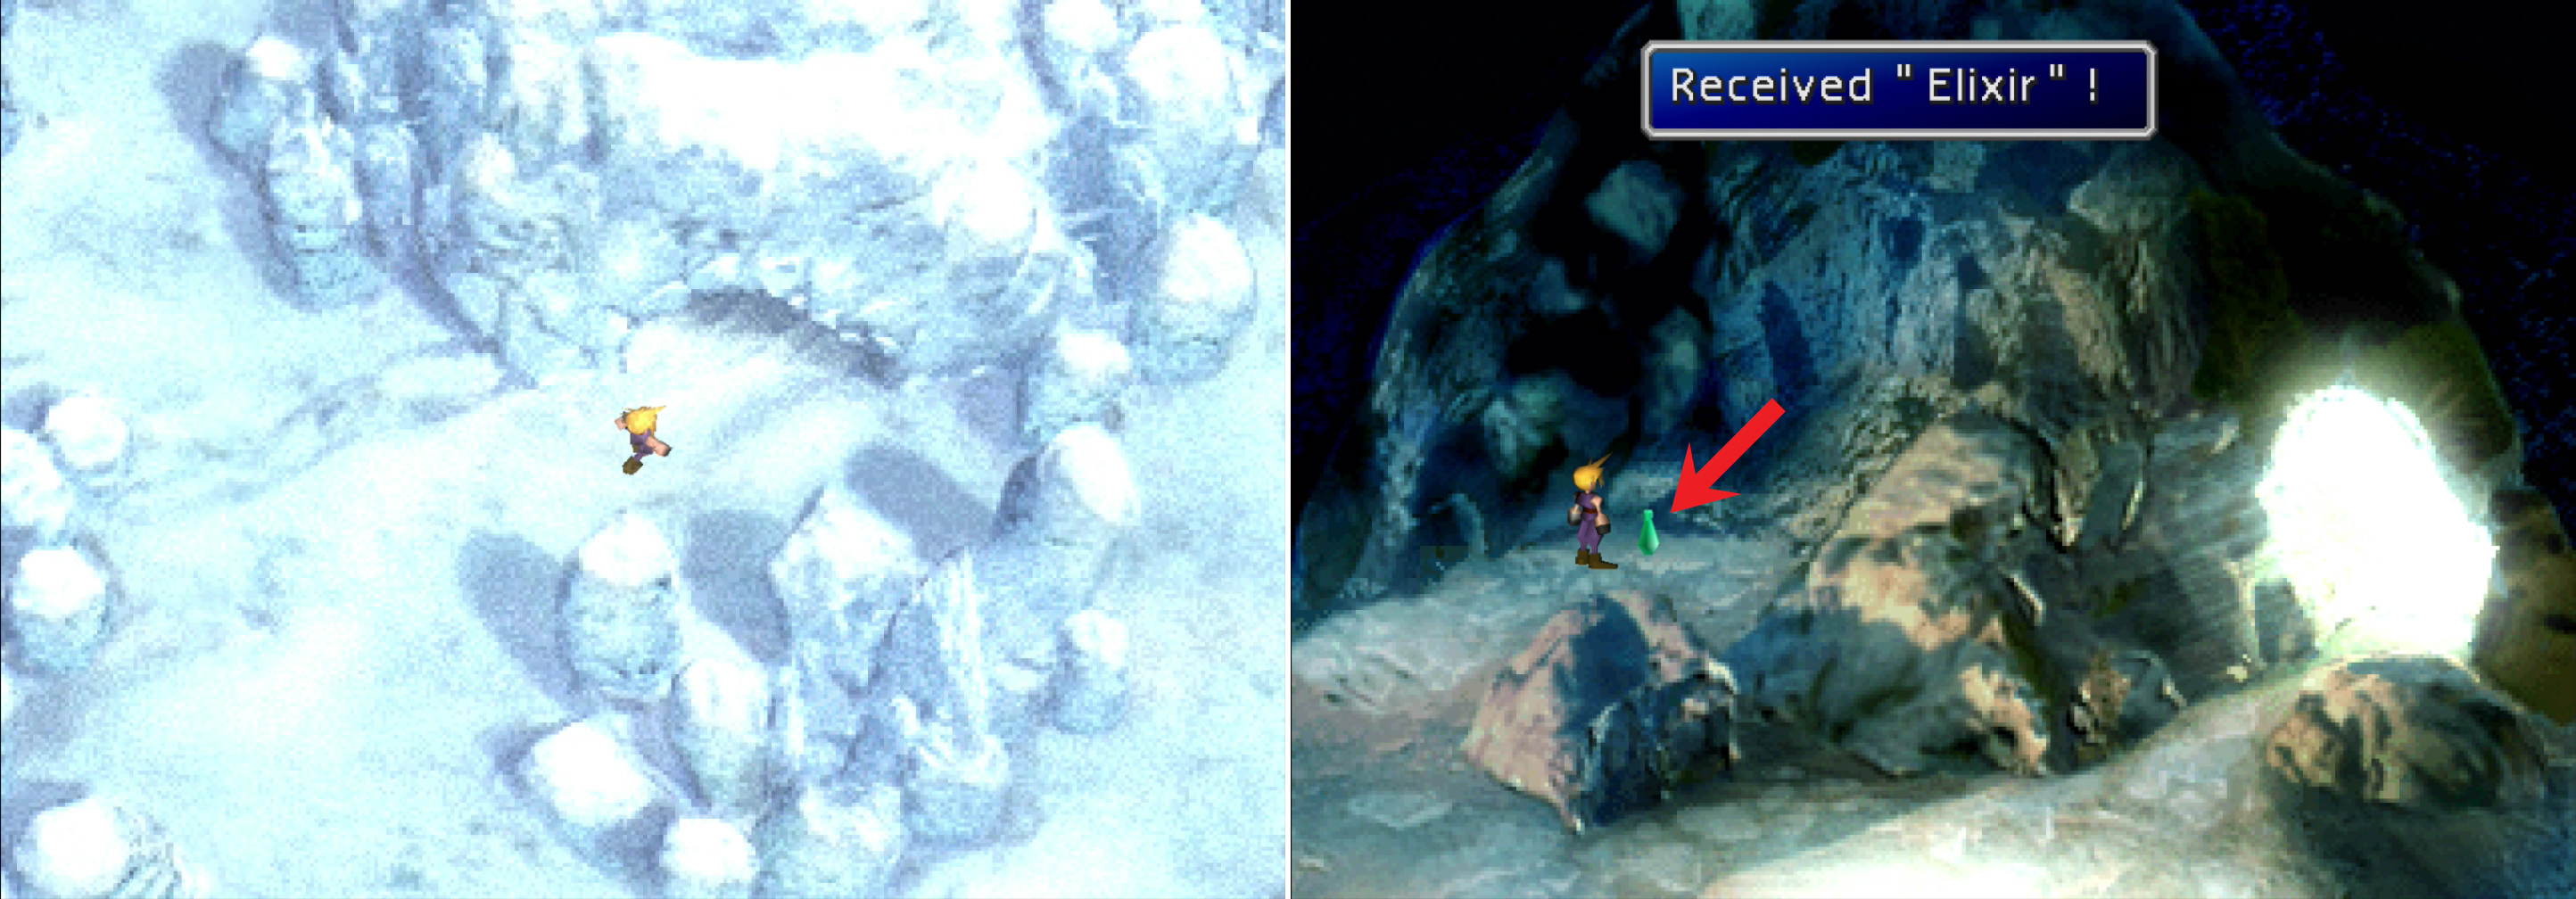 In the Ice Pillars area, enter the cave (left) and grab the Elixir inside (right).